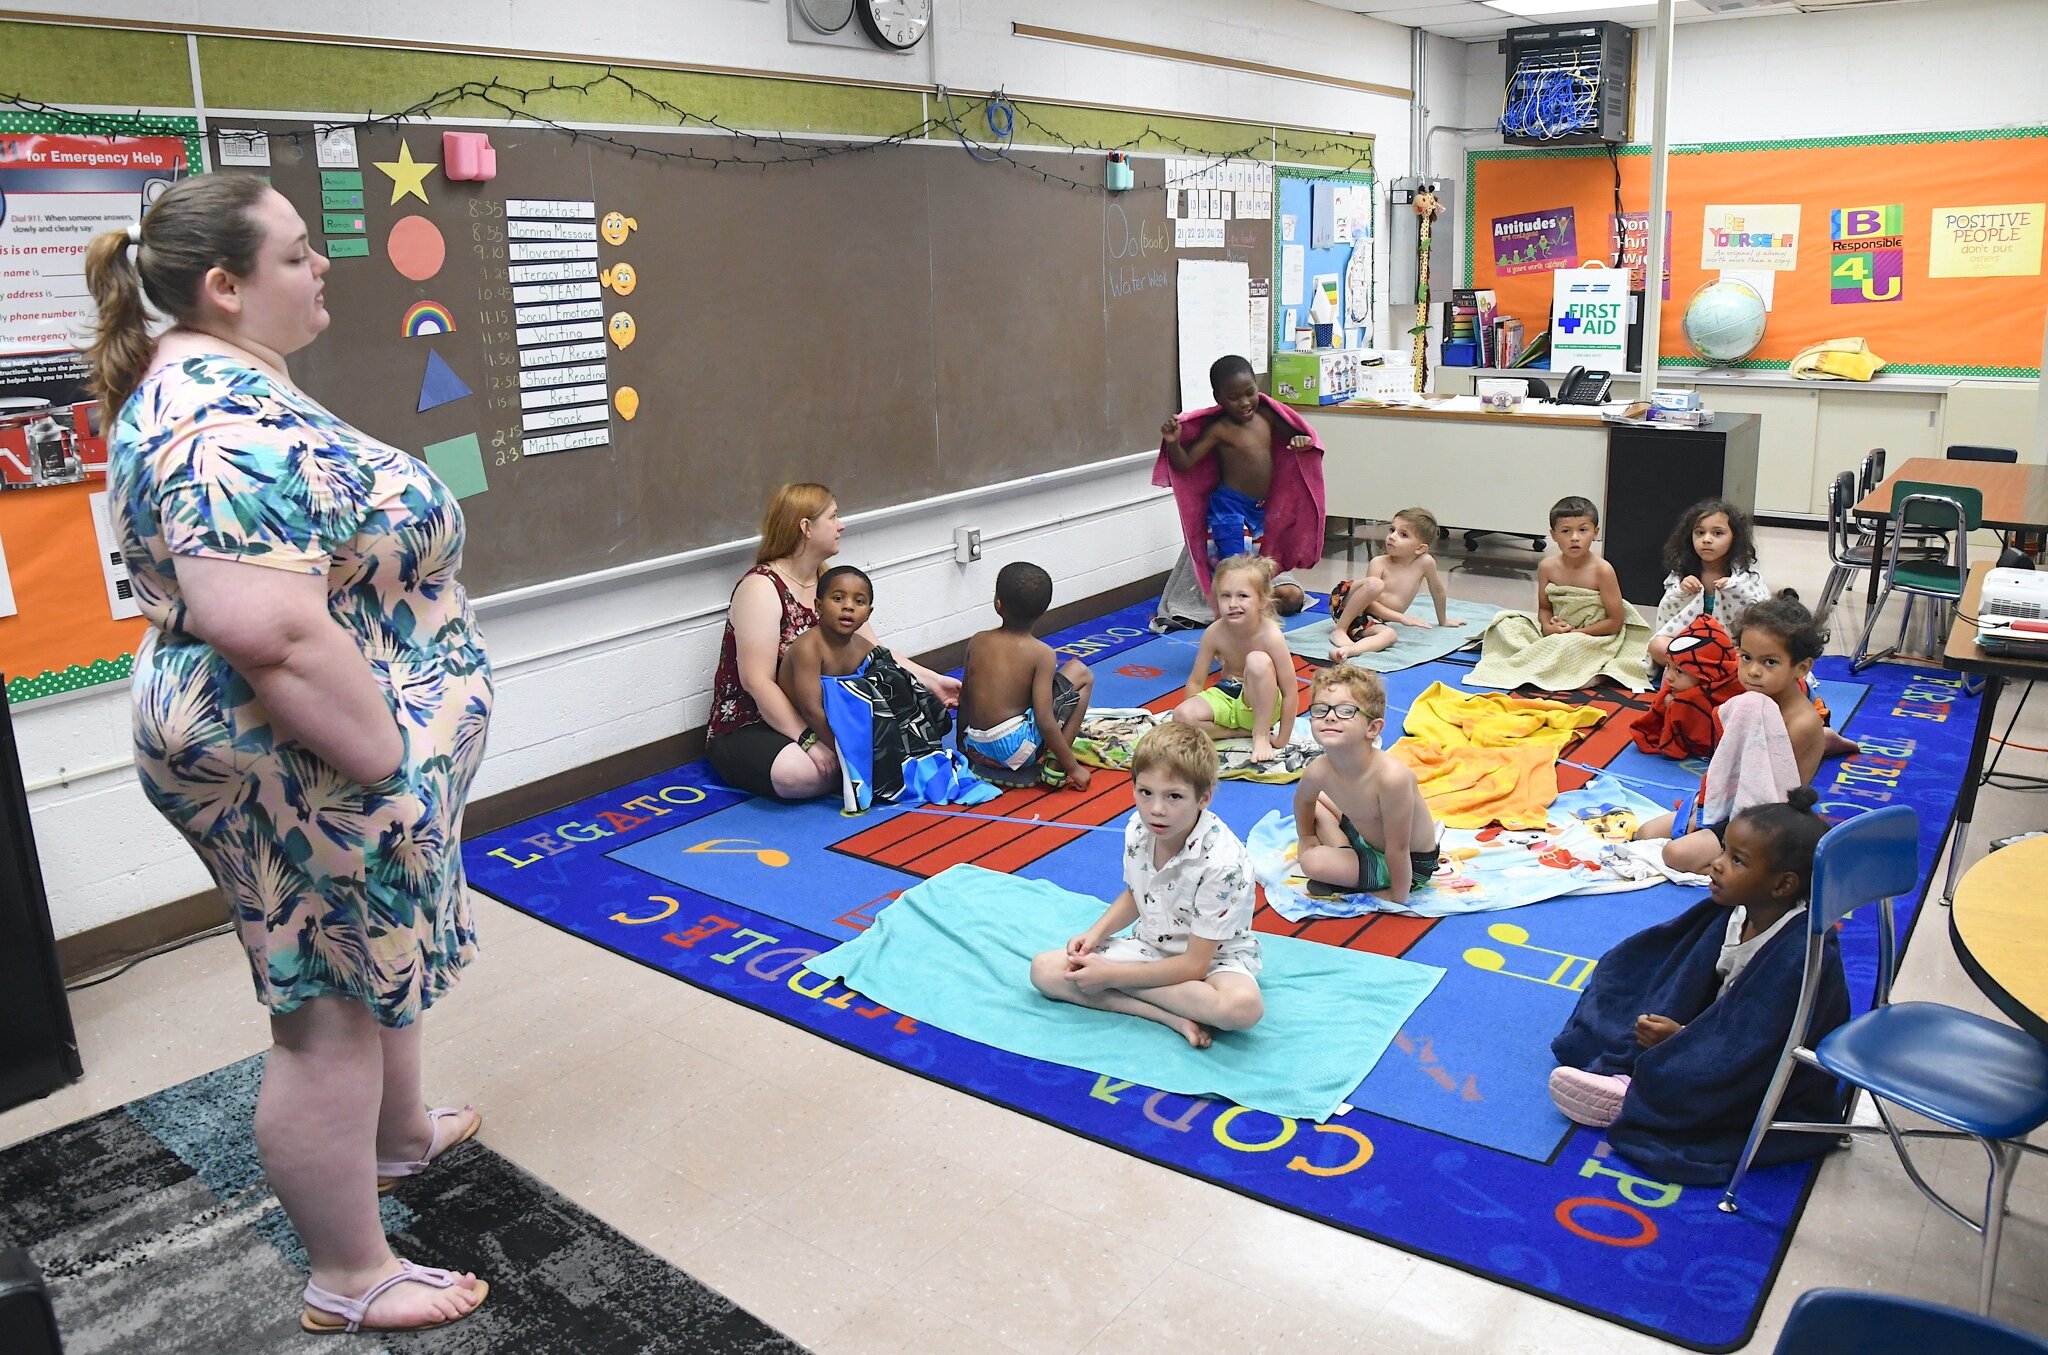 Ardenia Kamen, left, talks with students about water safety during a morning session at Franklin-Post Elementary School.